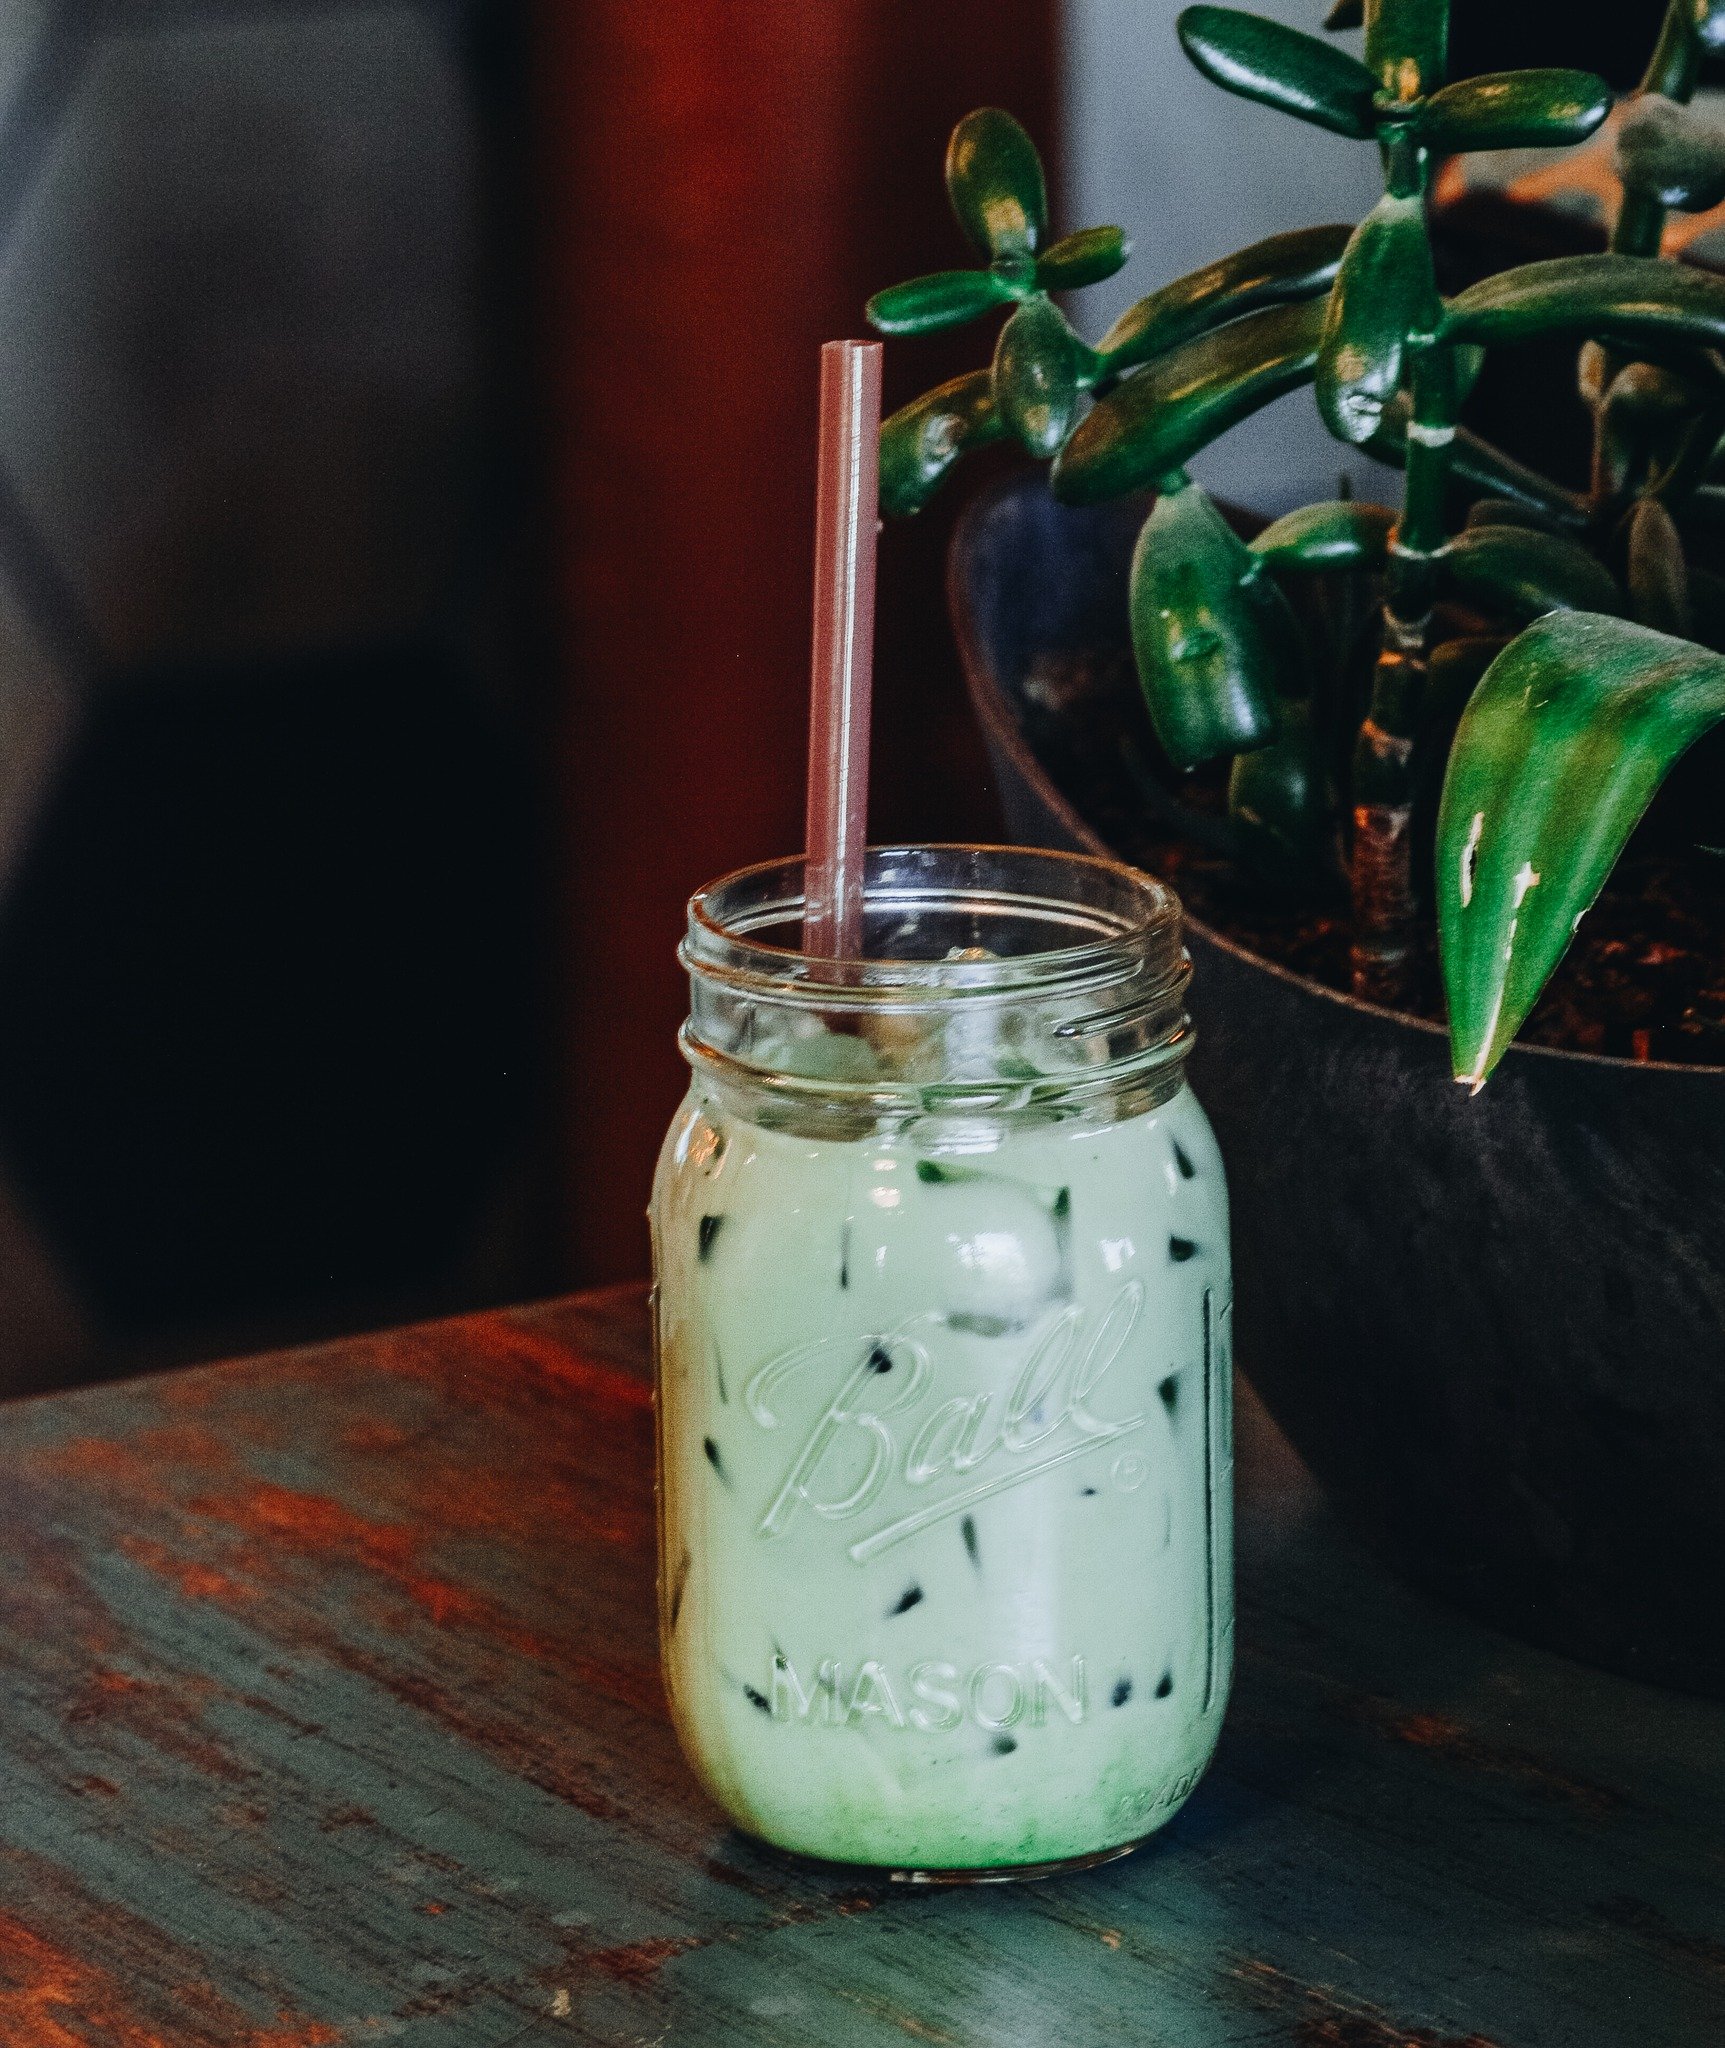 Iced Drinks season is upon us!  Our matcha is even better over ice. The vibrant green tea, creamy milk, and refreshing ice make it the perfect drink to brighten your day. Enjoy it as a morning pick-me-up or an afternoon treat!

#Matcha #MatchaLatte #